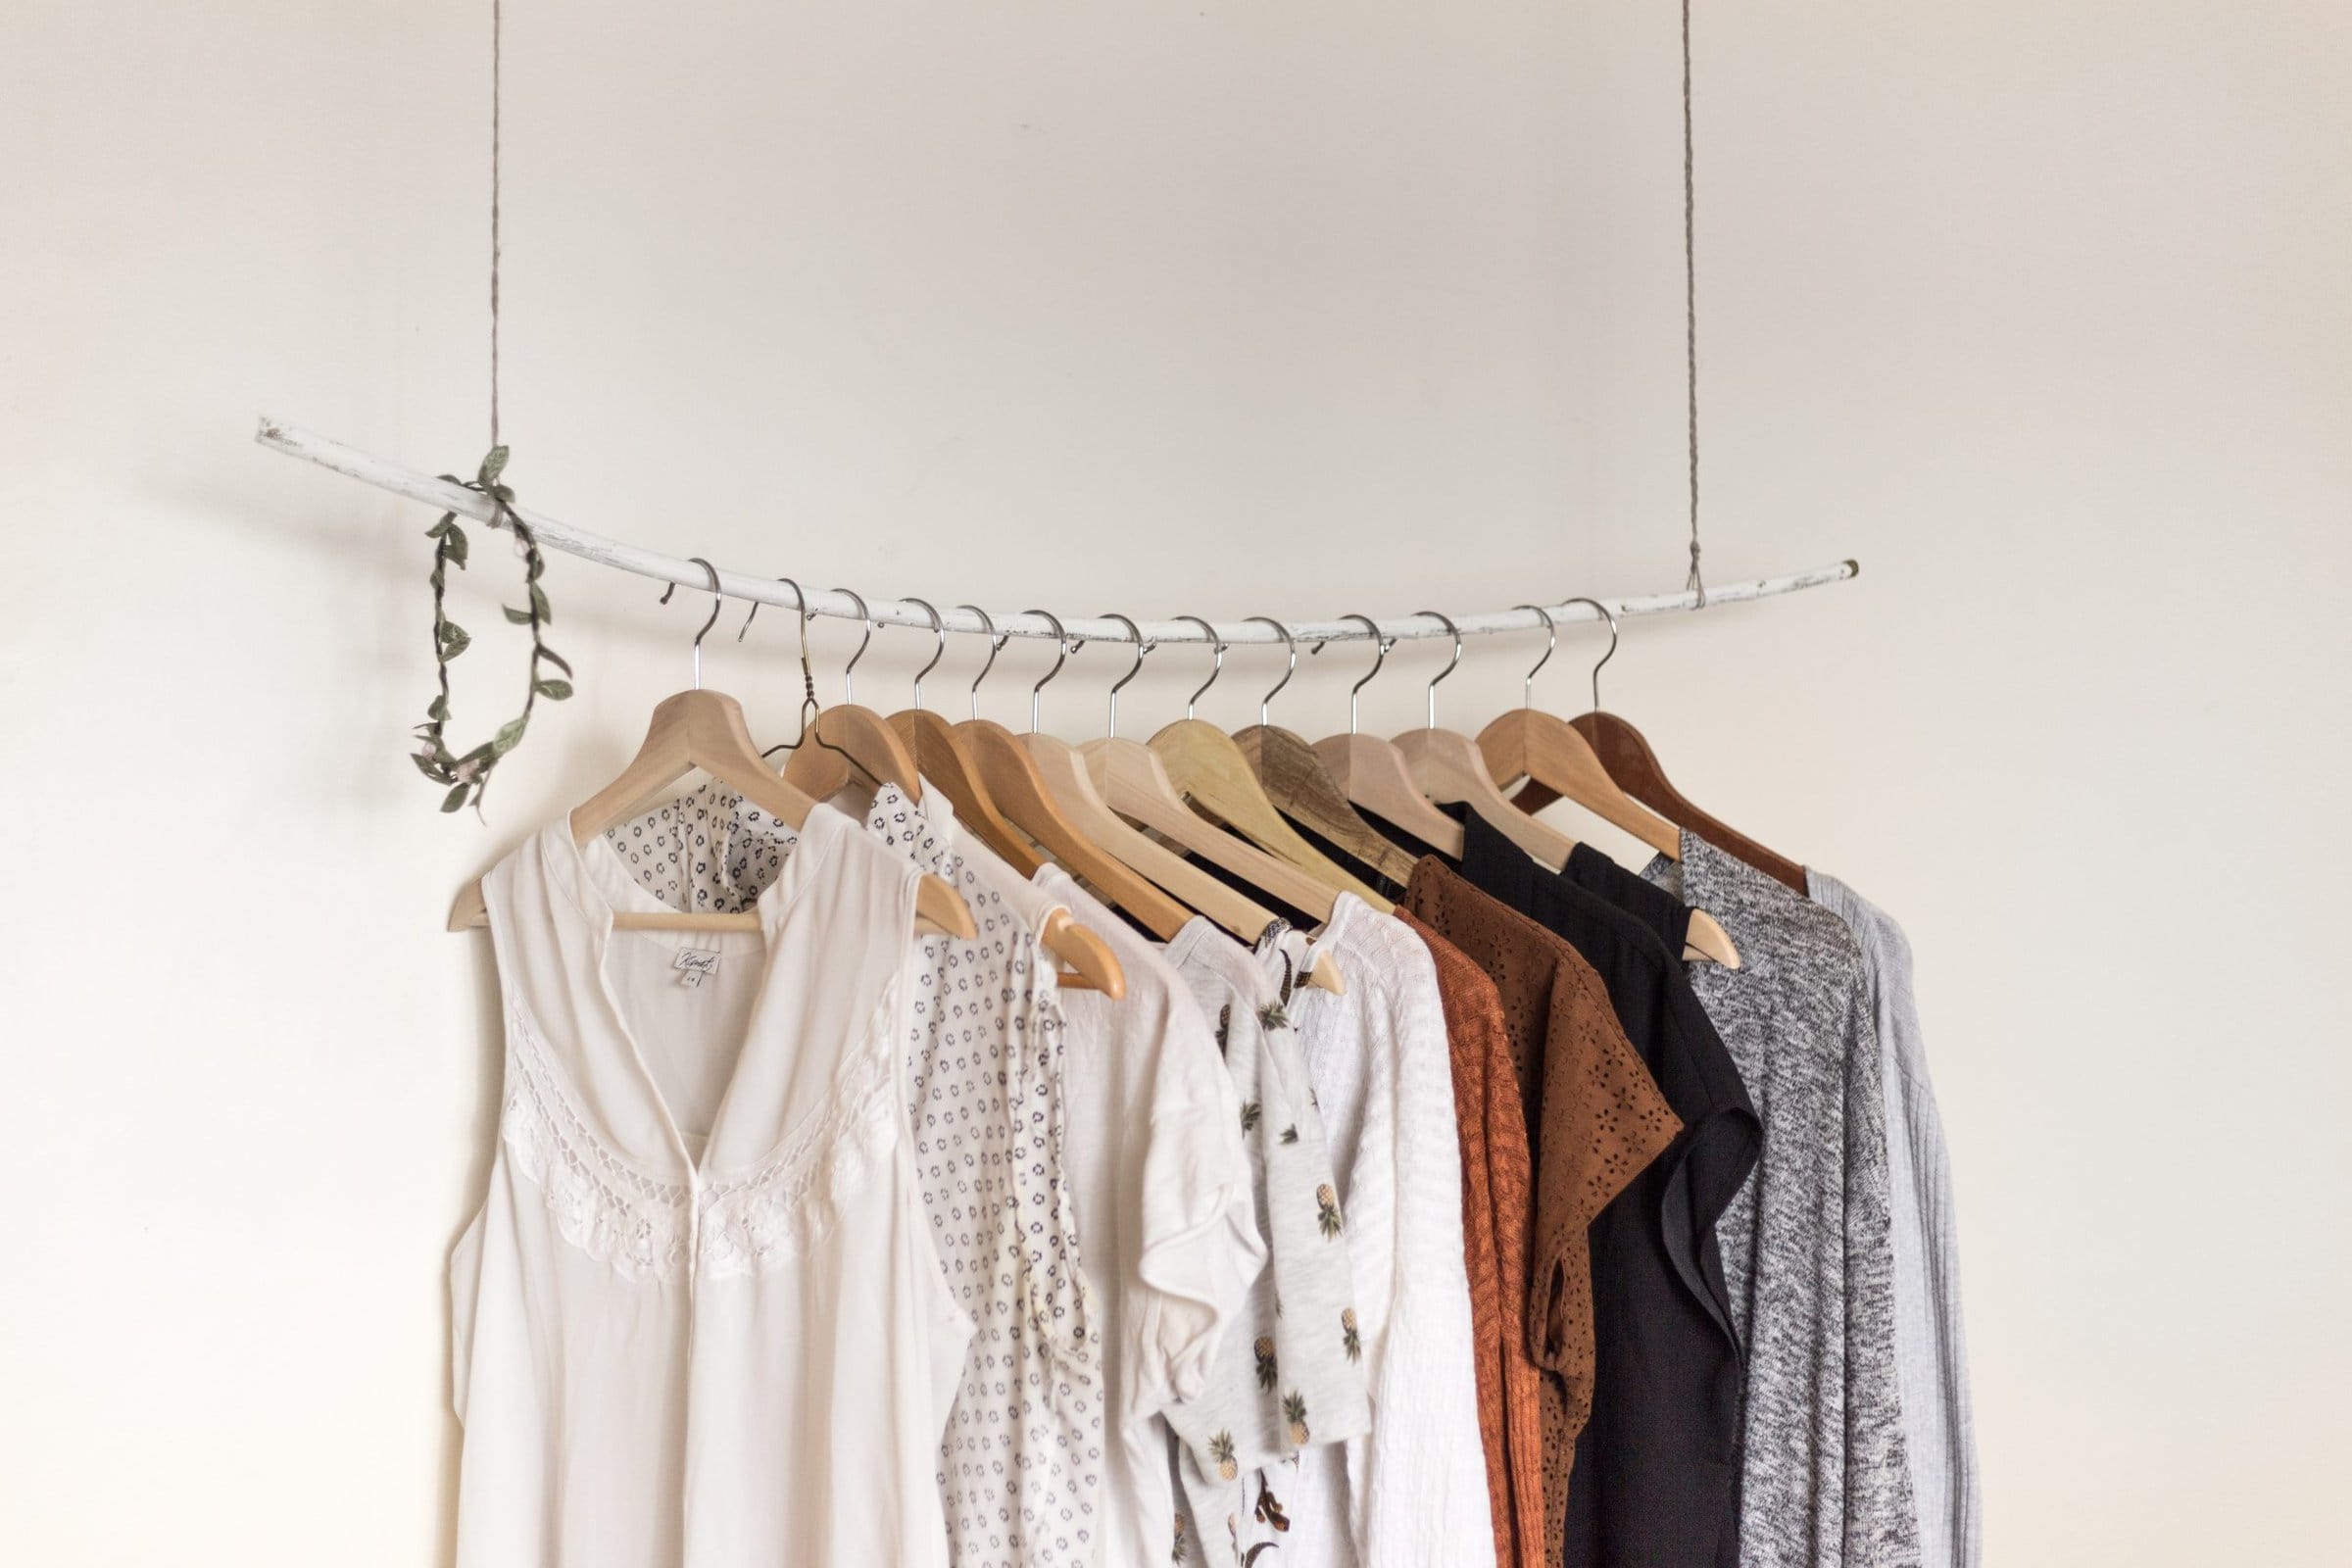  Hang a Drying Rail from the Ceiling scaled